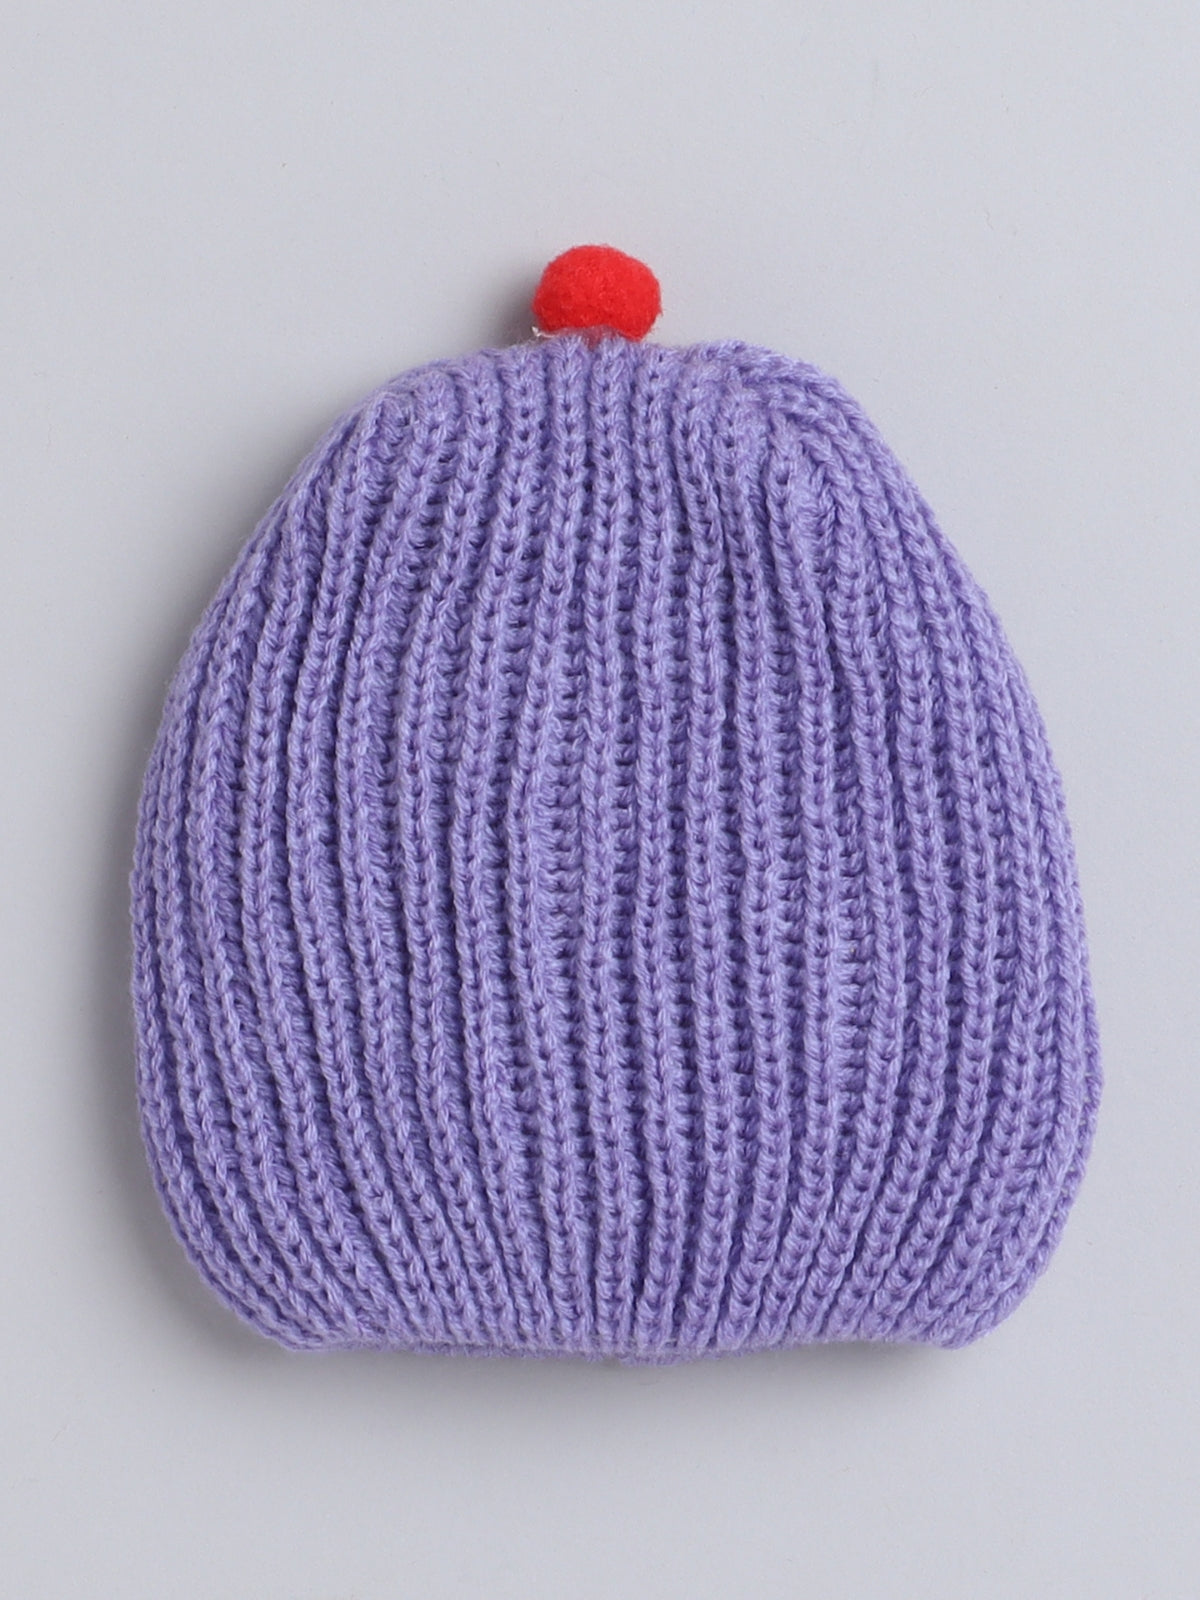 Knitted Violet color round cap for baby